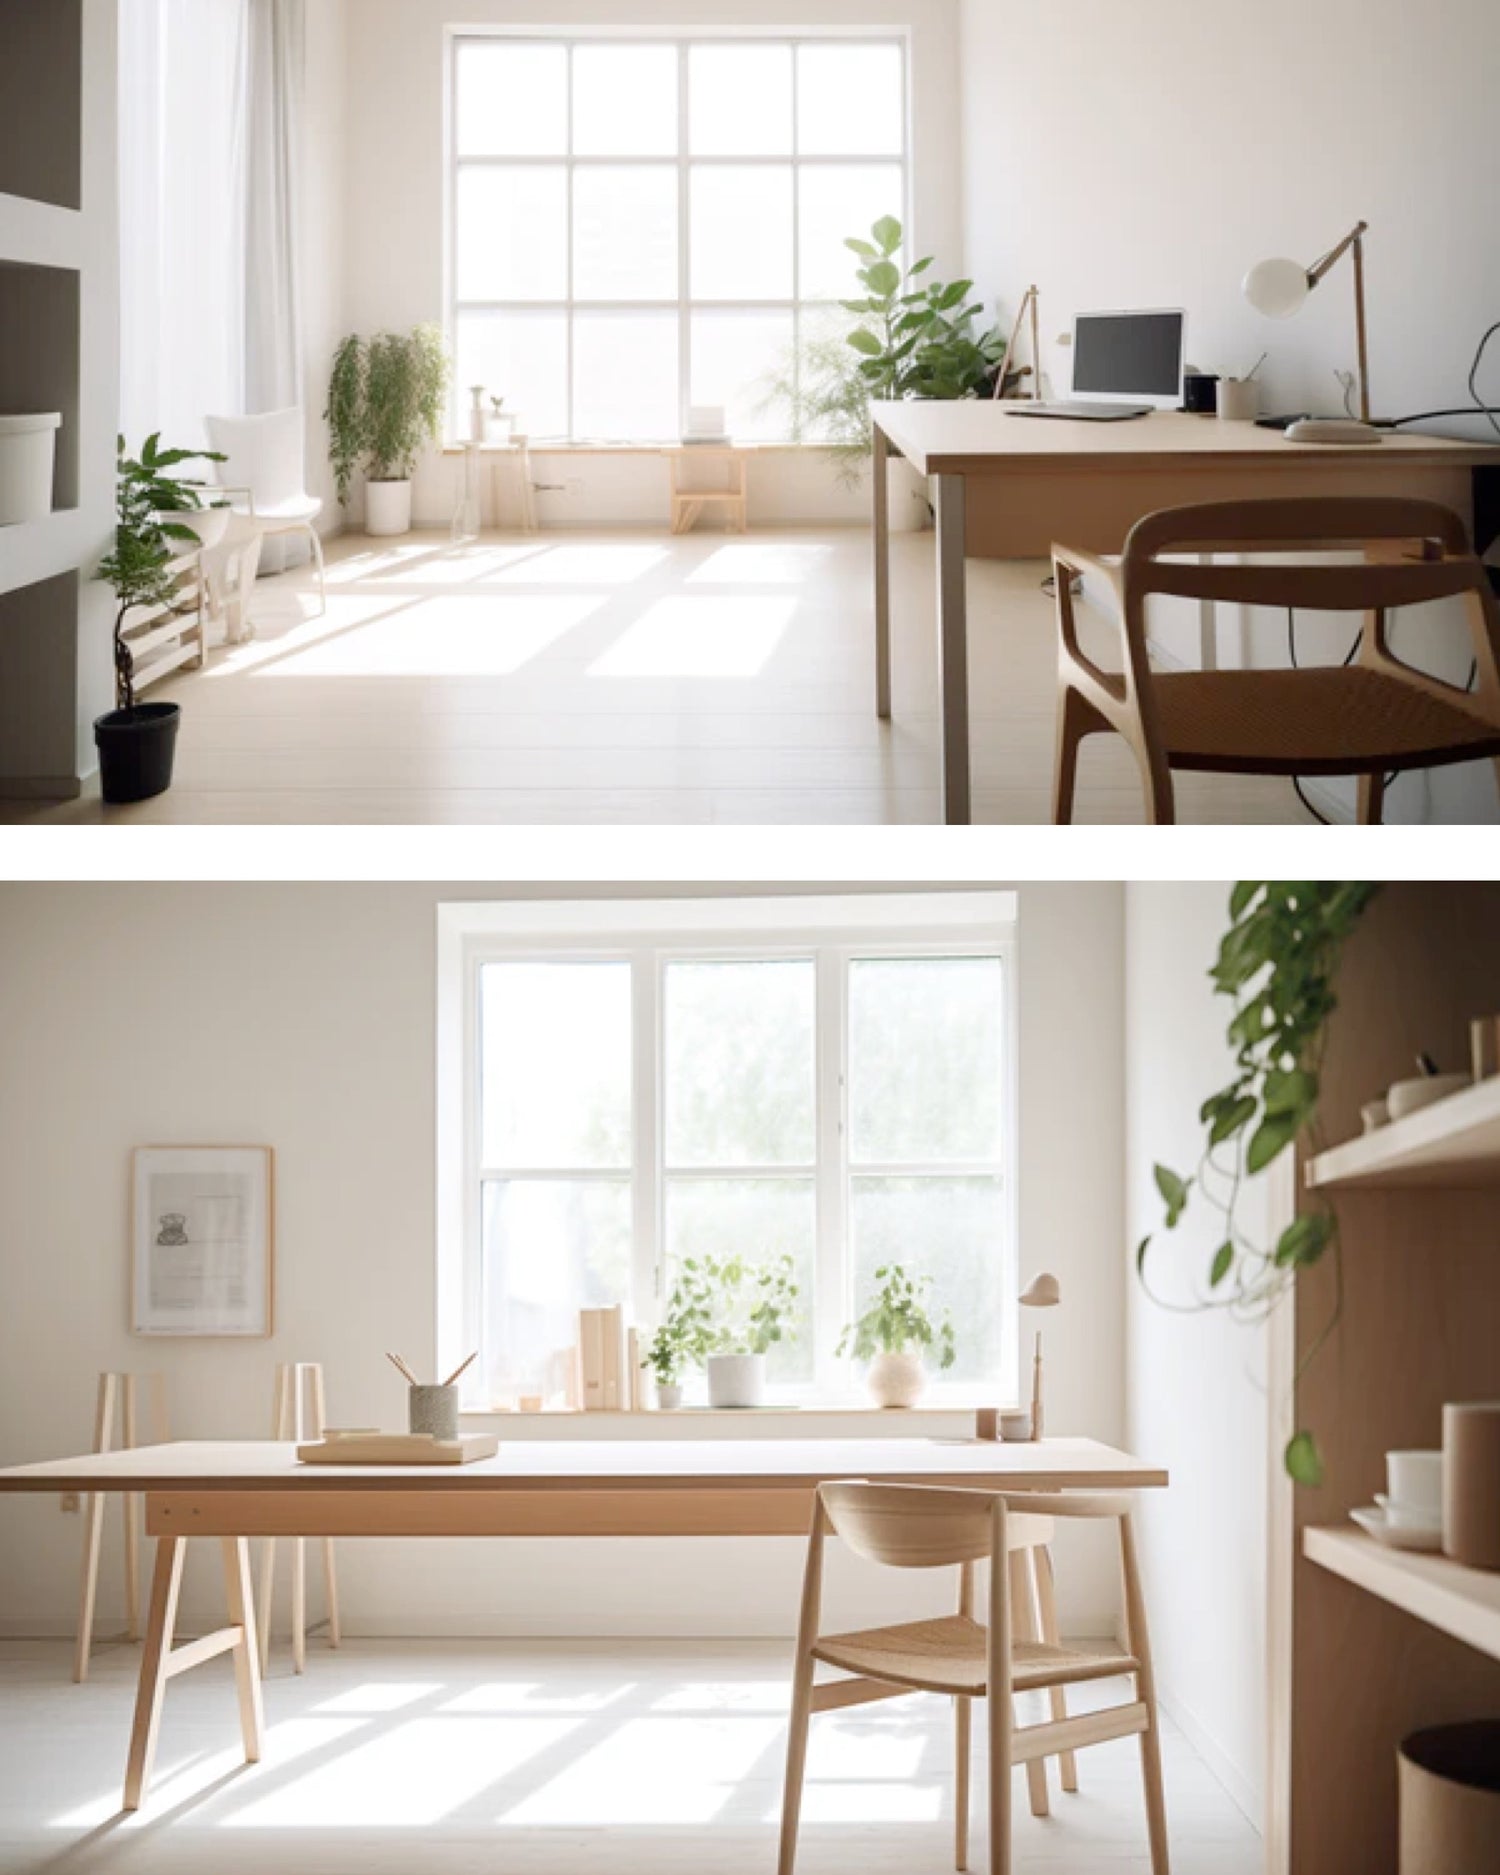 Kanso Designs, workspaces with plants